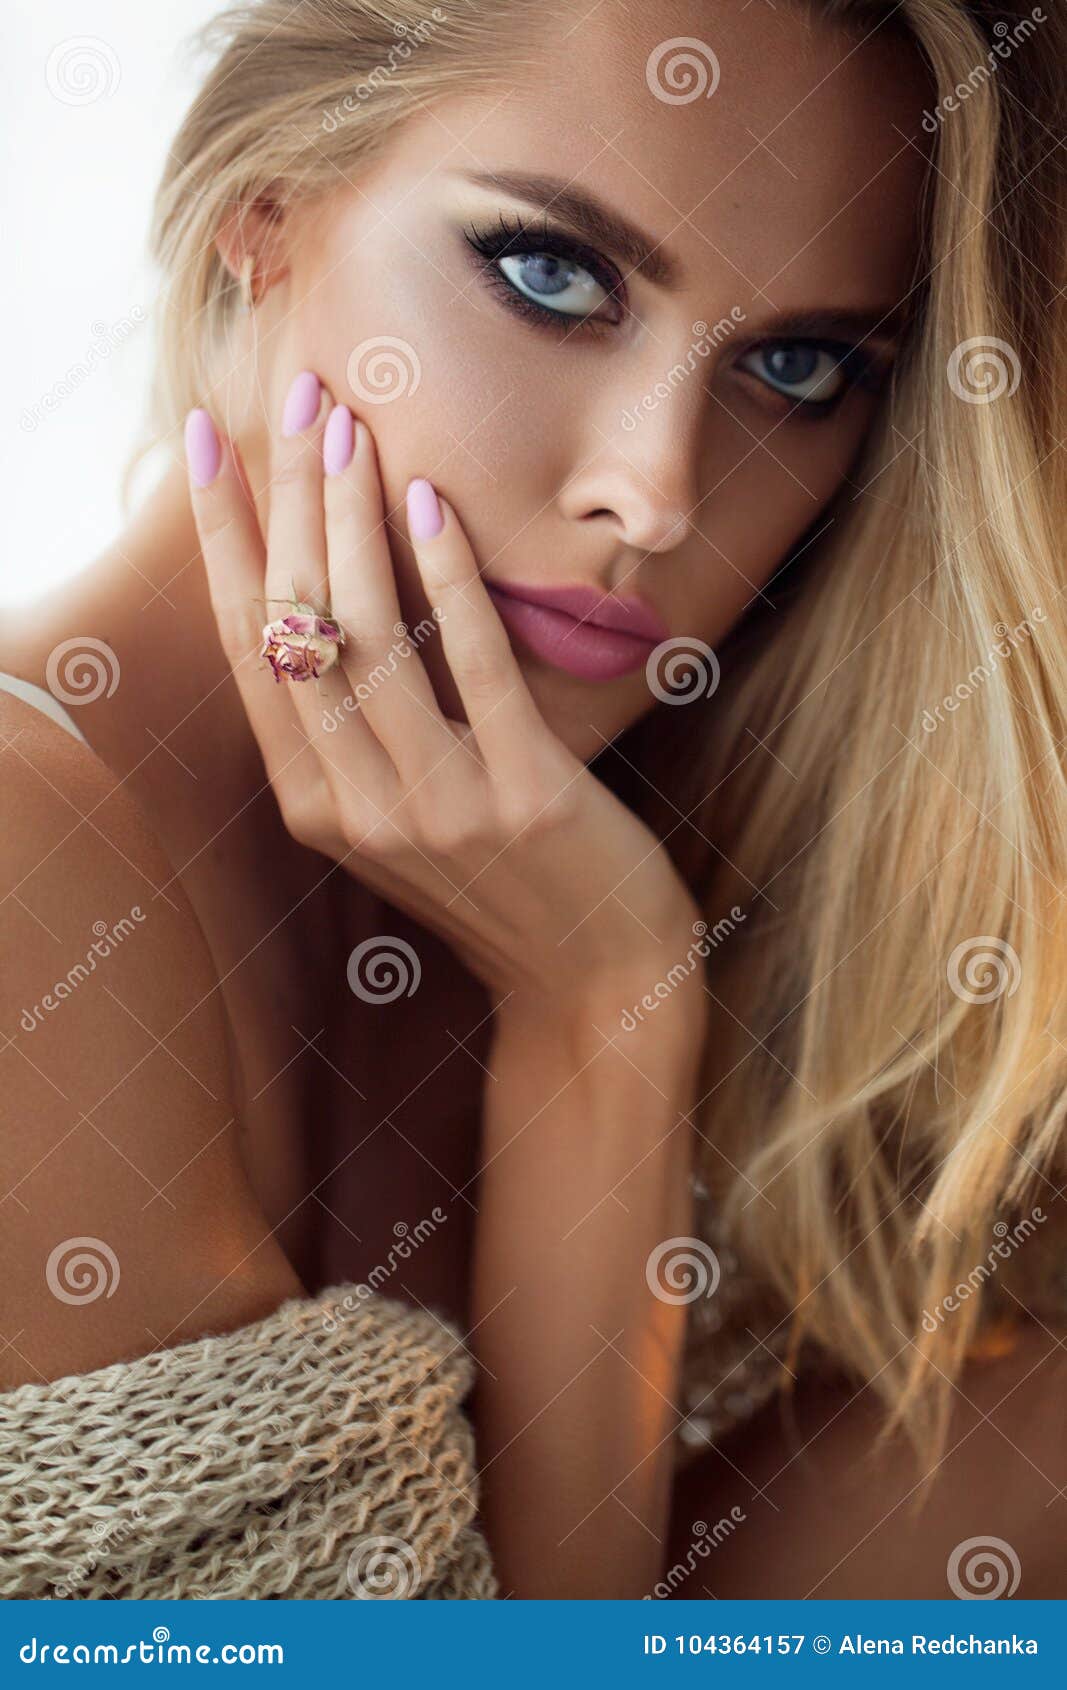 Beauty Fashion Model Woman Face Portrait With Pink Rose Flower